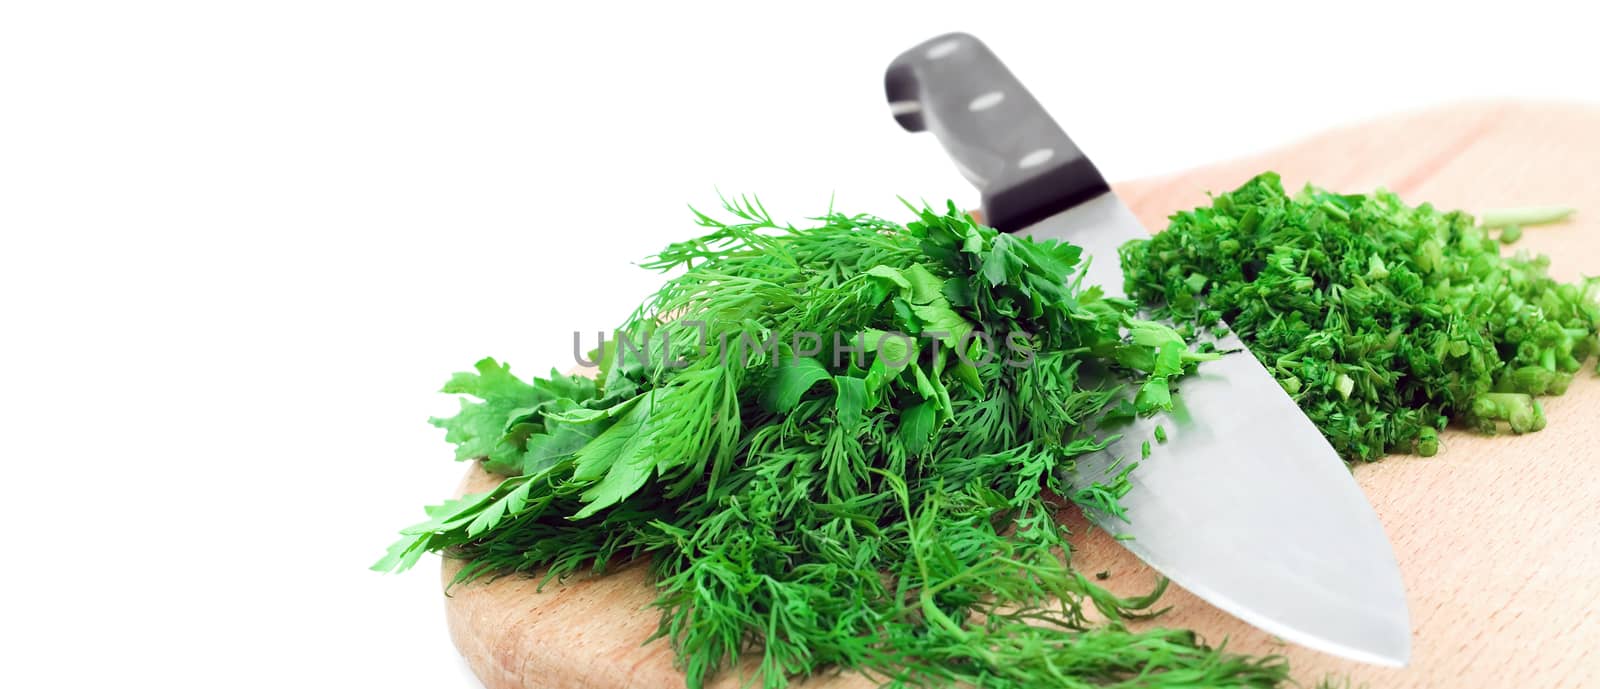 organic dill herb cutting chef knife isolated on white background. Top view cooking and home concept.